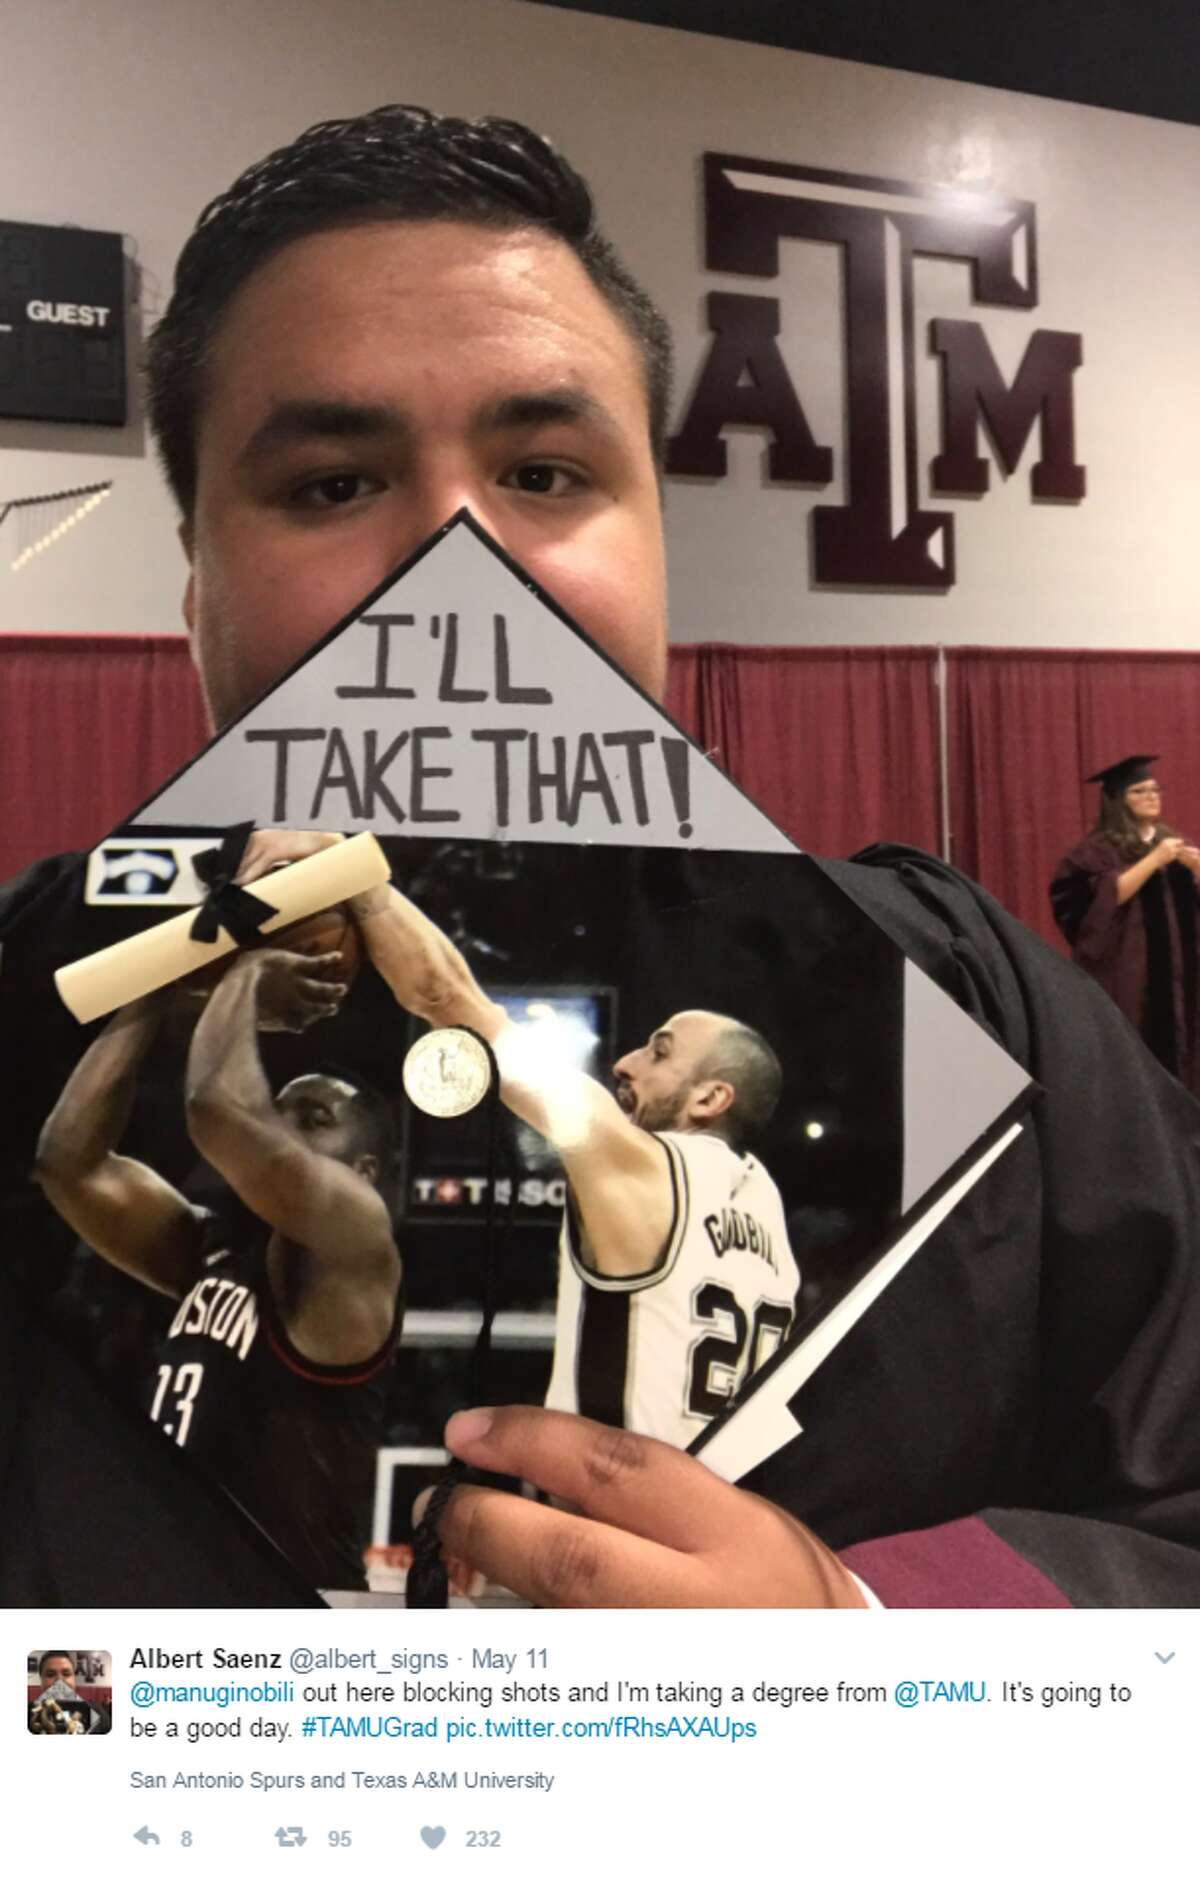 @albert_signs: @manuginobili out here blocking shots and I'm taking a degree from @TAMU. It's going to be a good day. #TAMUGrad